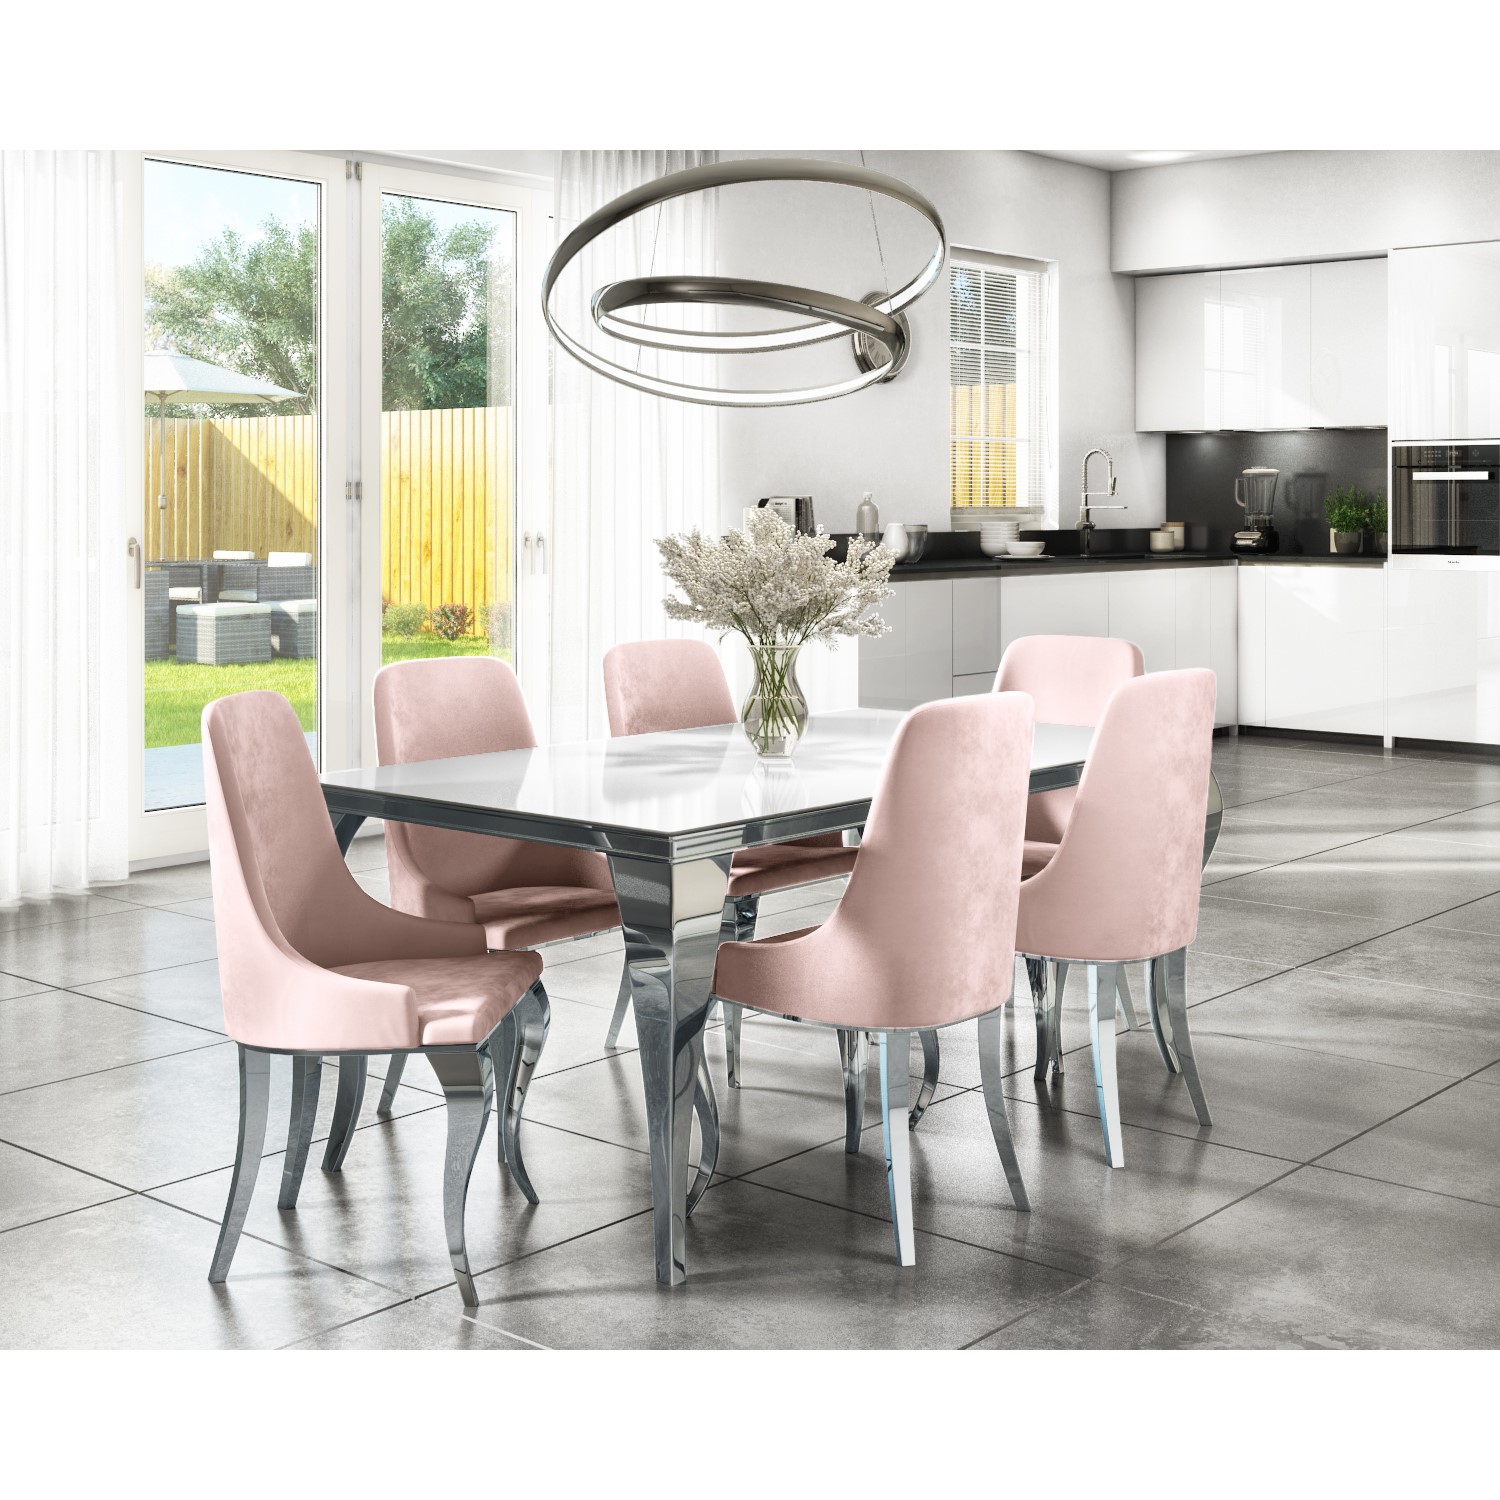 Mirrored 160cm Dining Table Set With, Baby Pink Dining Room Chairs